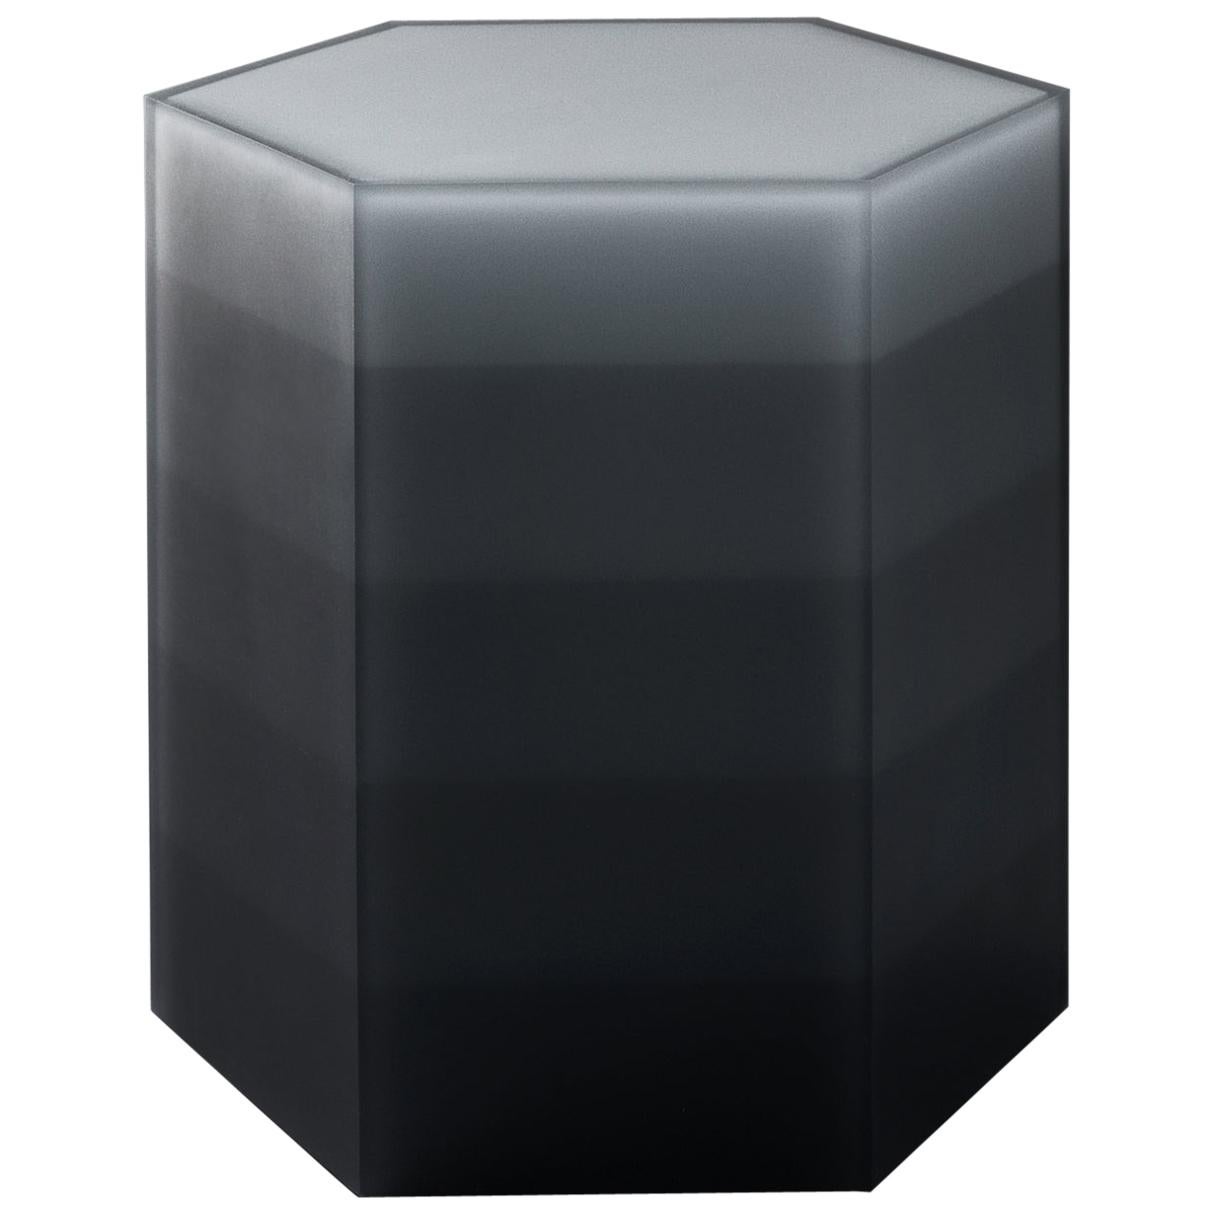 Gradient Hex Box Resin Side Table/Stool Gray by Facture, REP by Tuleste Factory